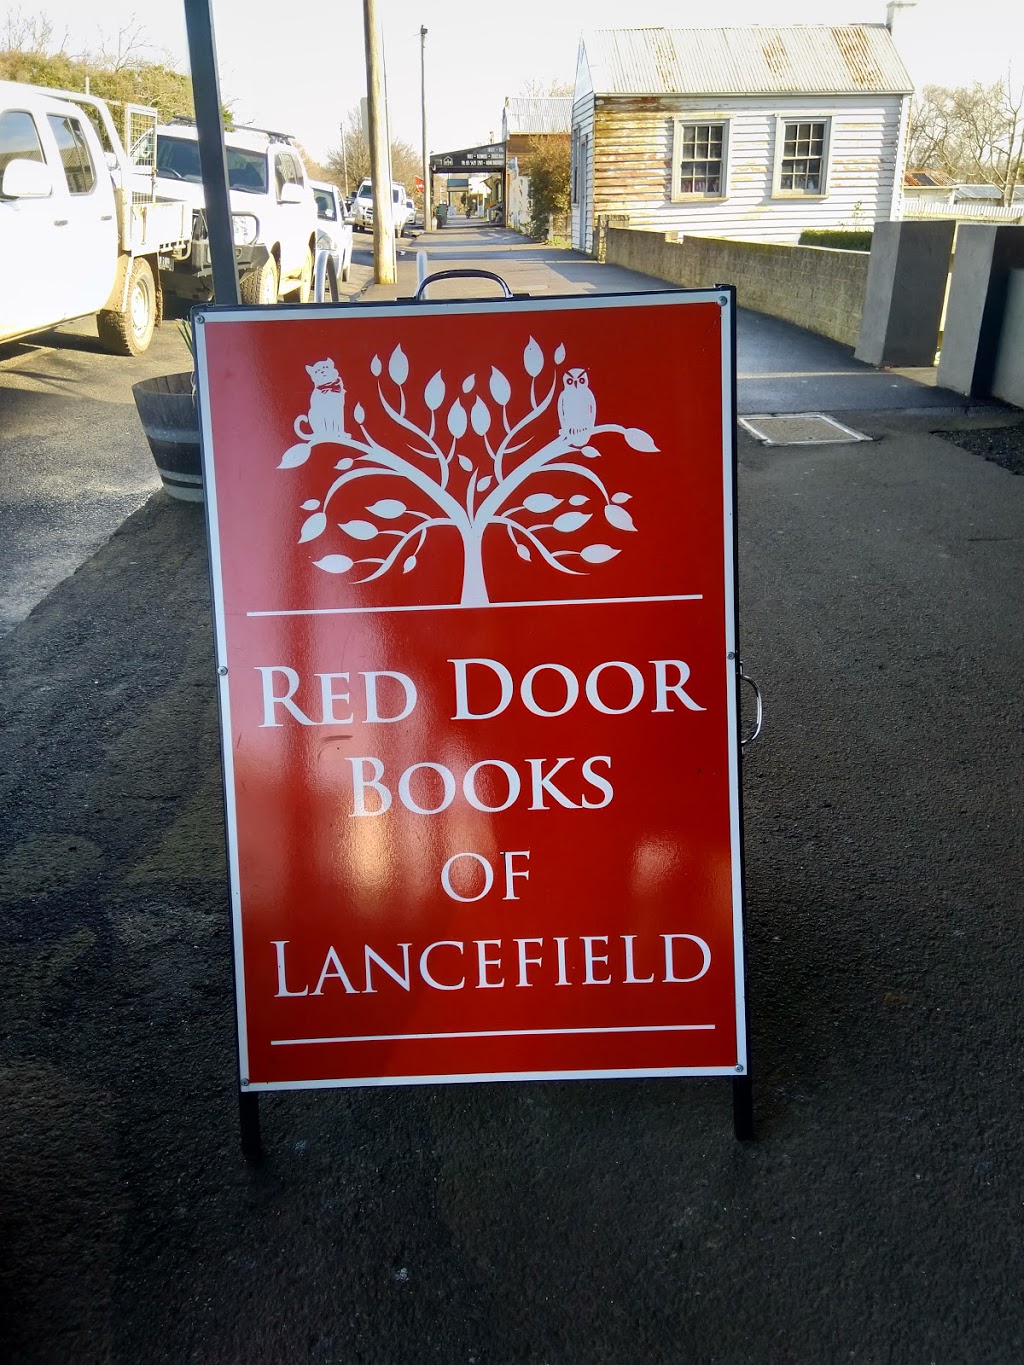 Red Door Books of Lancefield | book store | 34 High St, Lancefield VIC 3435, Australia | 0354292566 OR +61 3 5429 2566